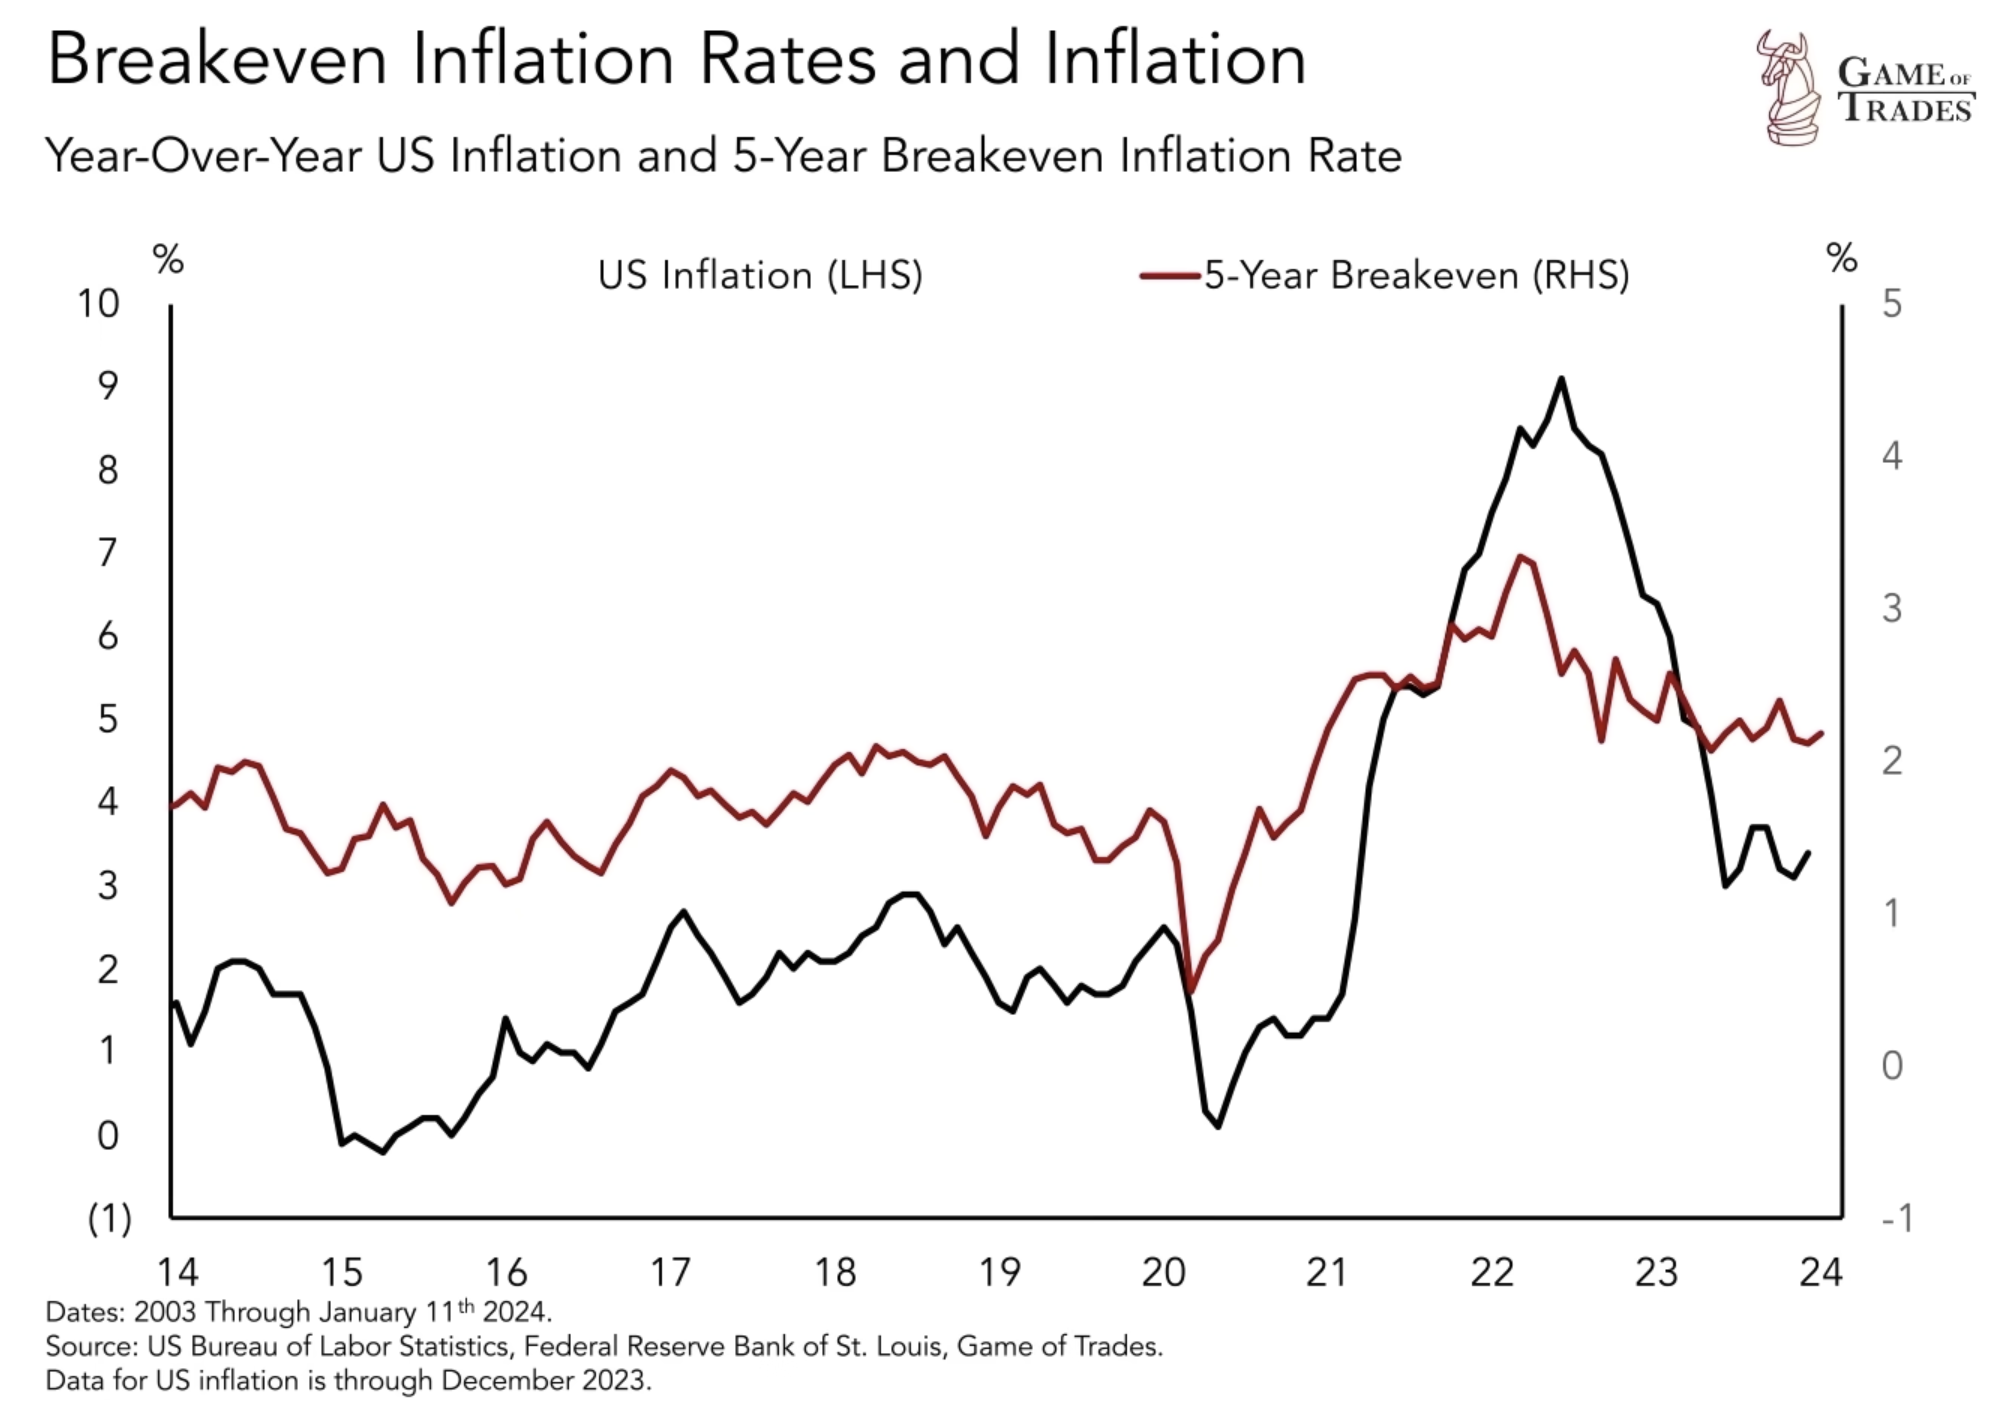 Breakeven inflation rates